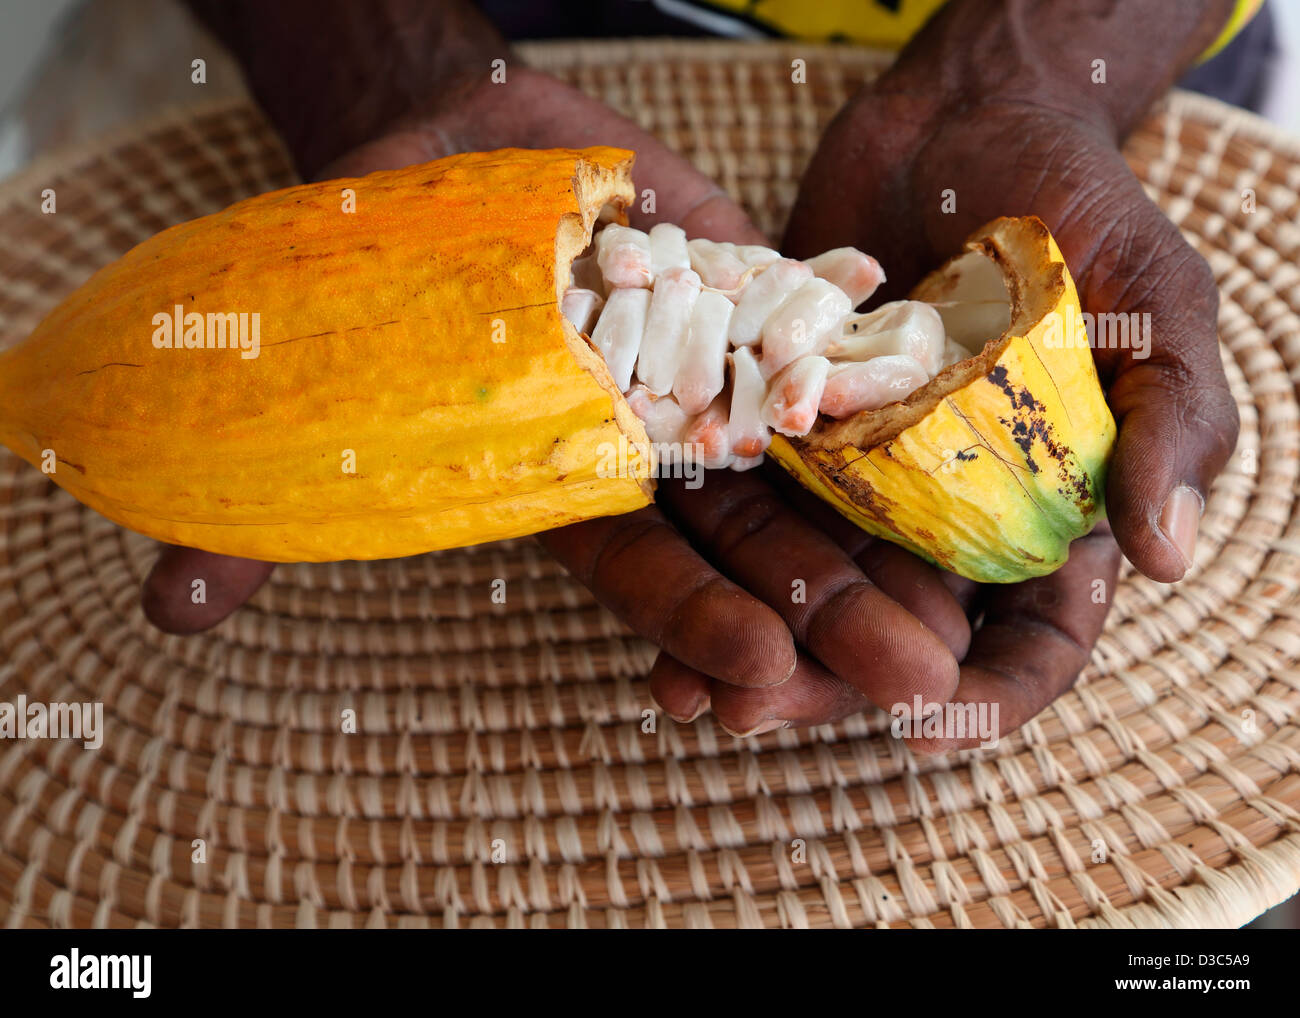 FRESH CACAO POD WITH COCOA BEANS Stock Photo